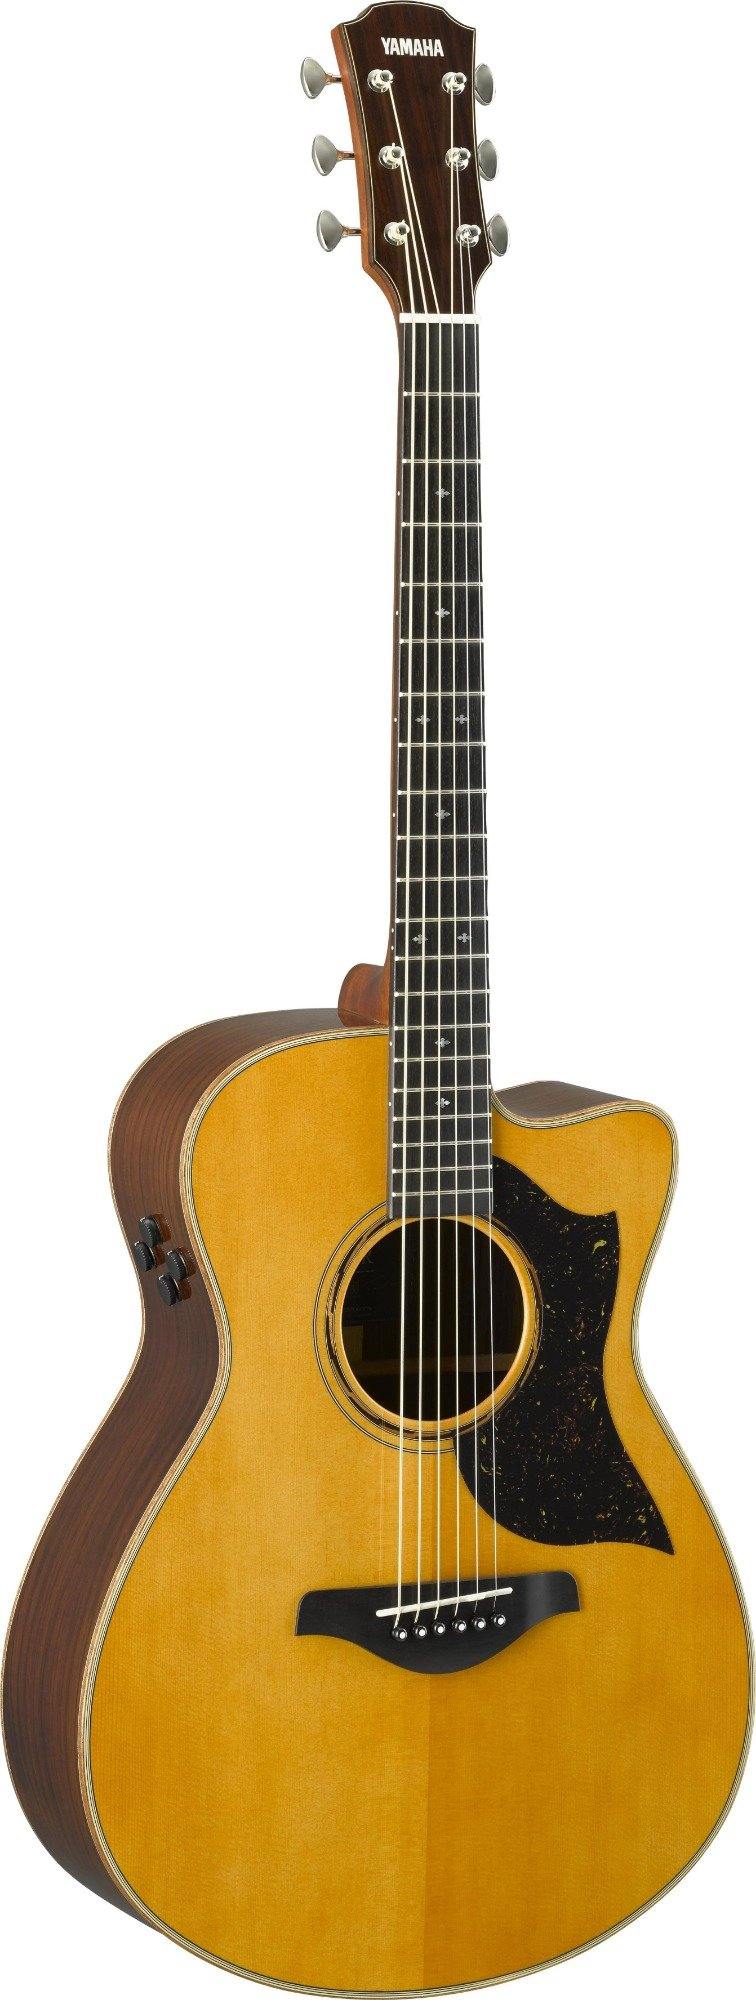 YAMAHA AC5R VN ELECTRIC ACOUSTIC GUITAR - Rockit Music Canada